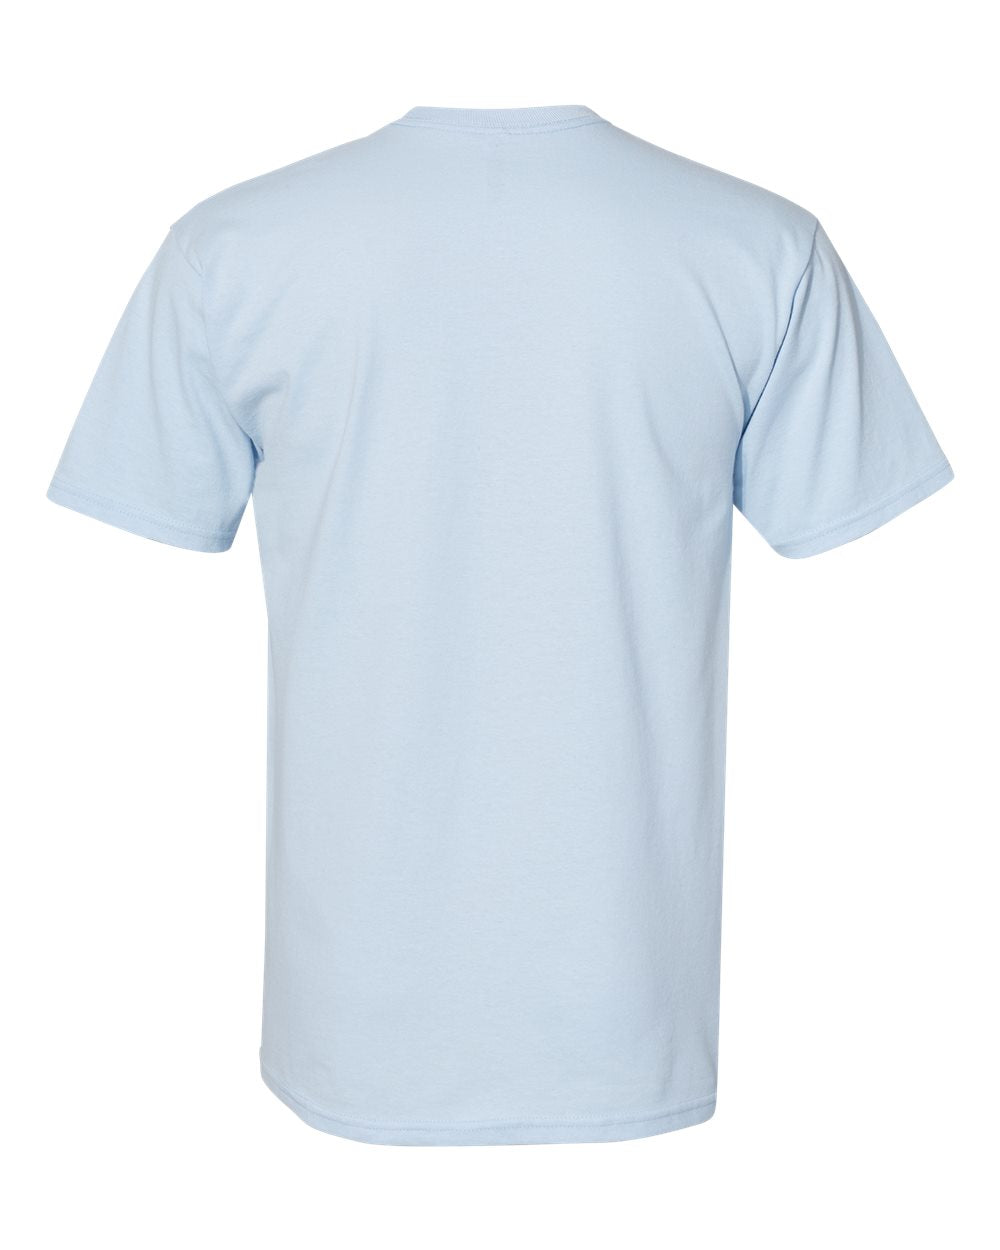 American Apparel Midweight Cotton Unisex Tee 1701 #color_Powder Blue